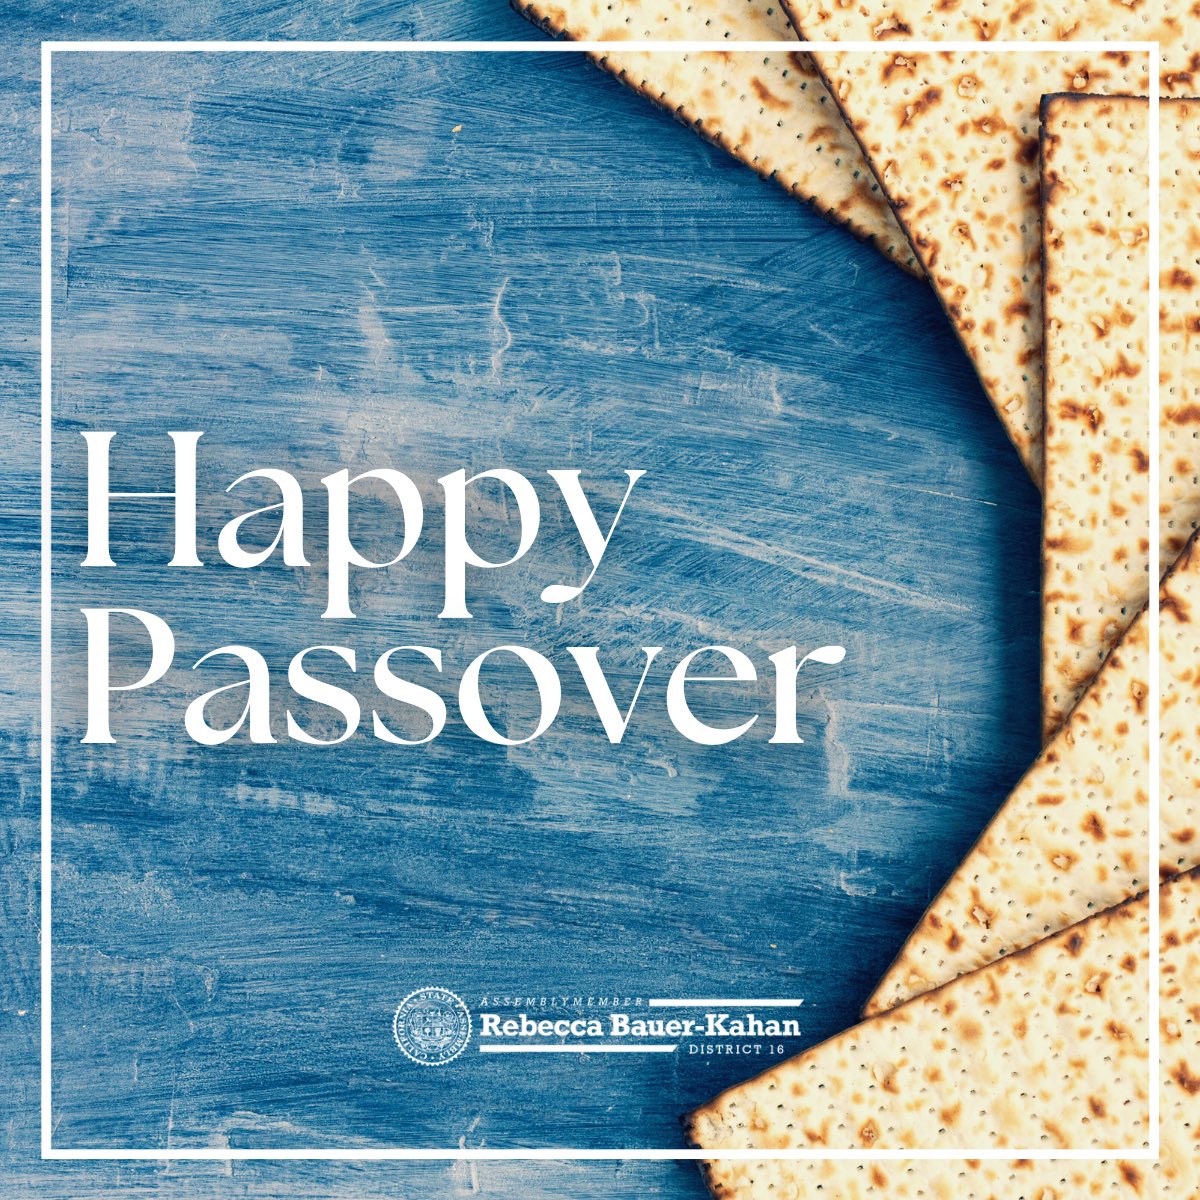 Happy Passover to all those celebrating in District 16! I’m looking forward to spending time with my family and community to reflect on the journeys of our ancestors.